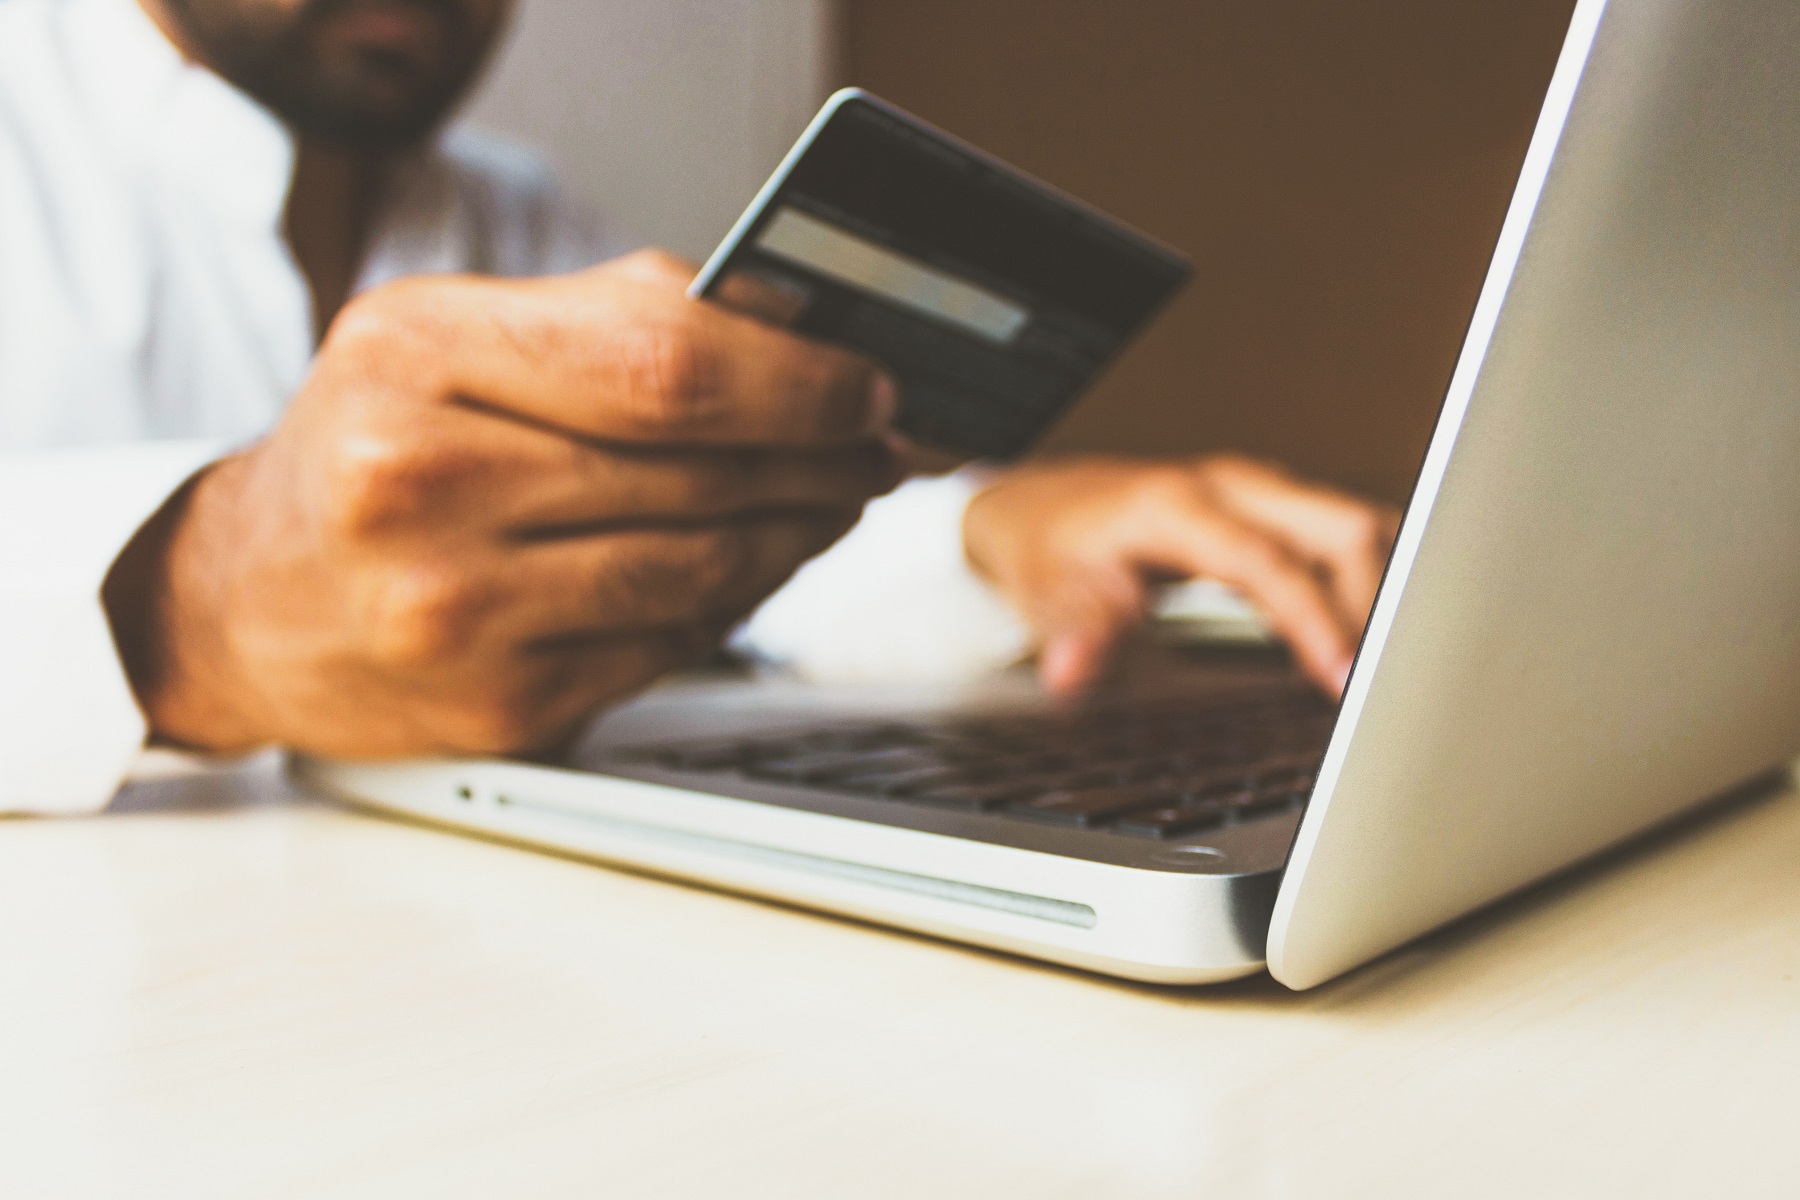 Growing cost pressures force changes to ecommerce buying behaviour